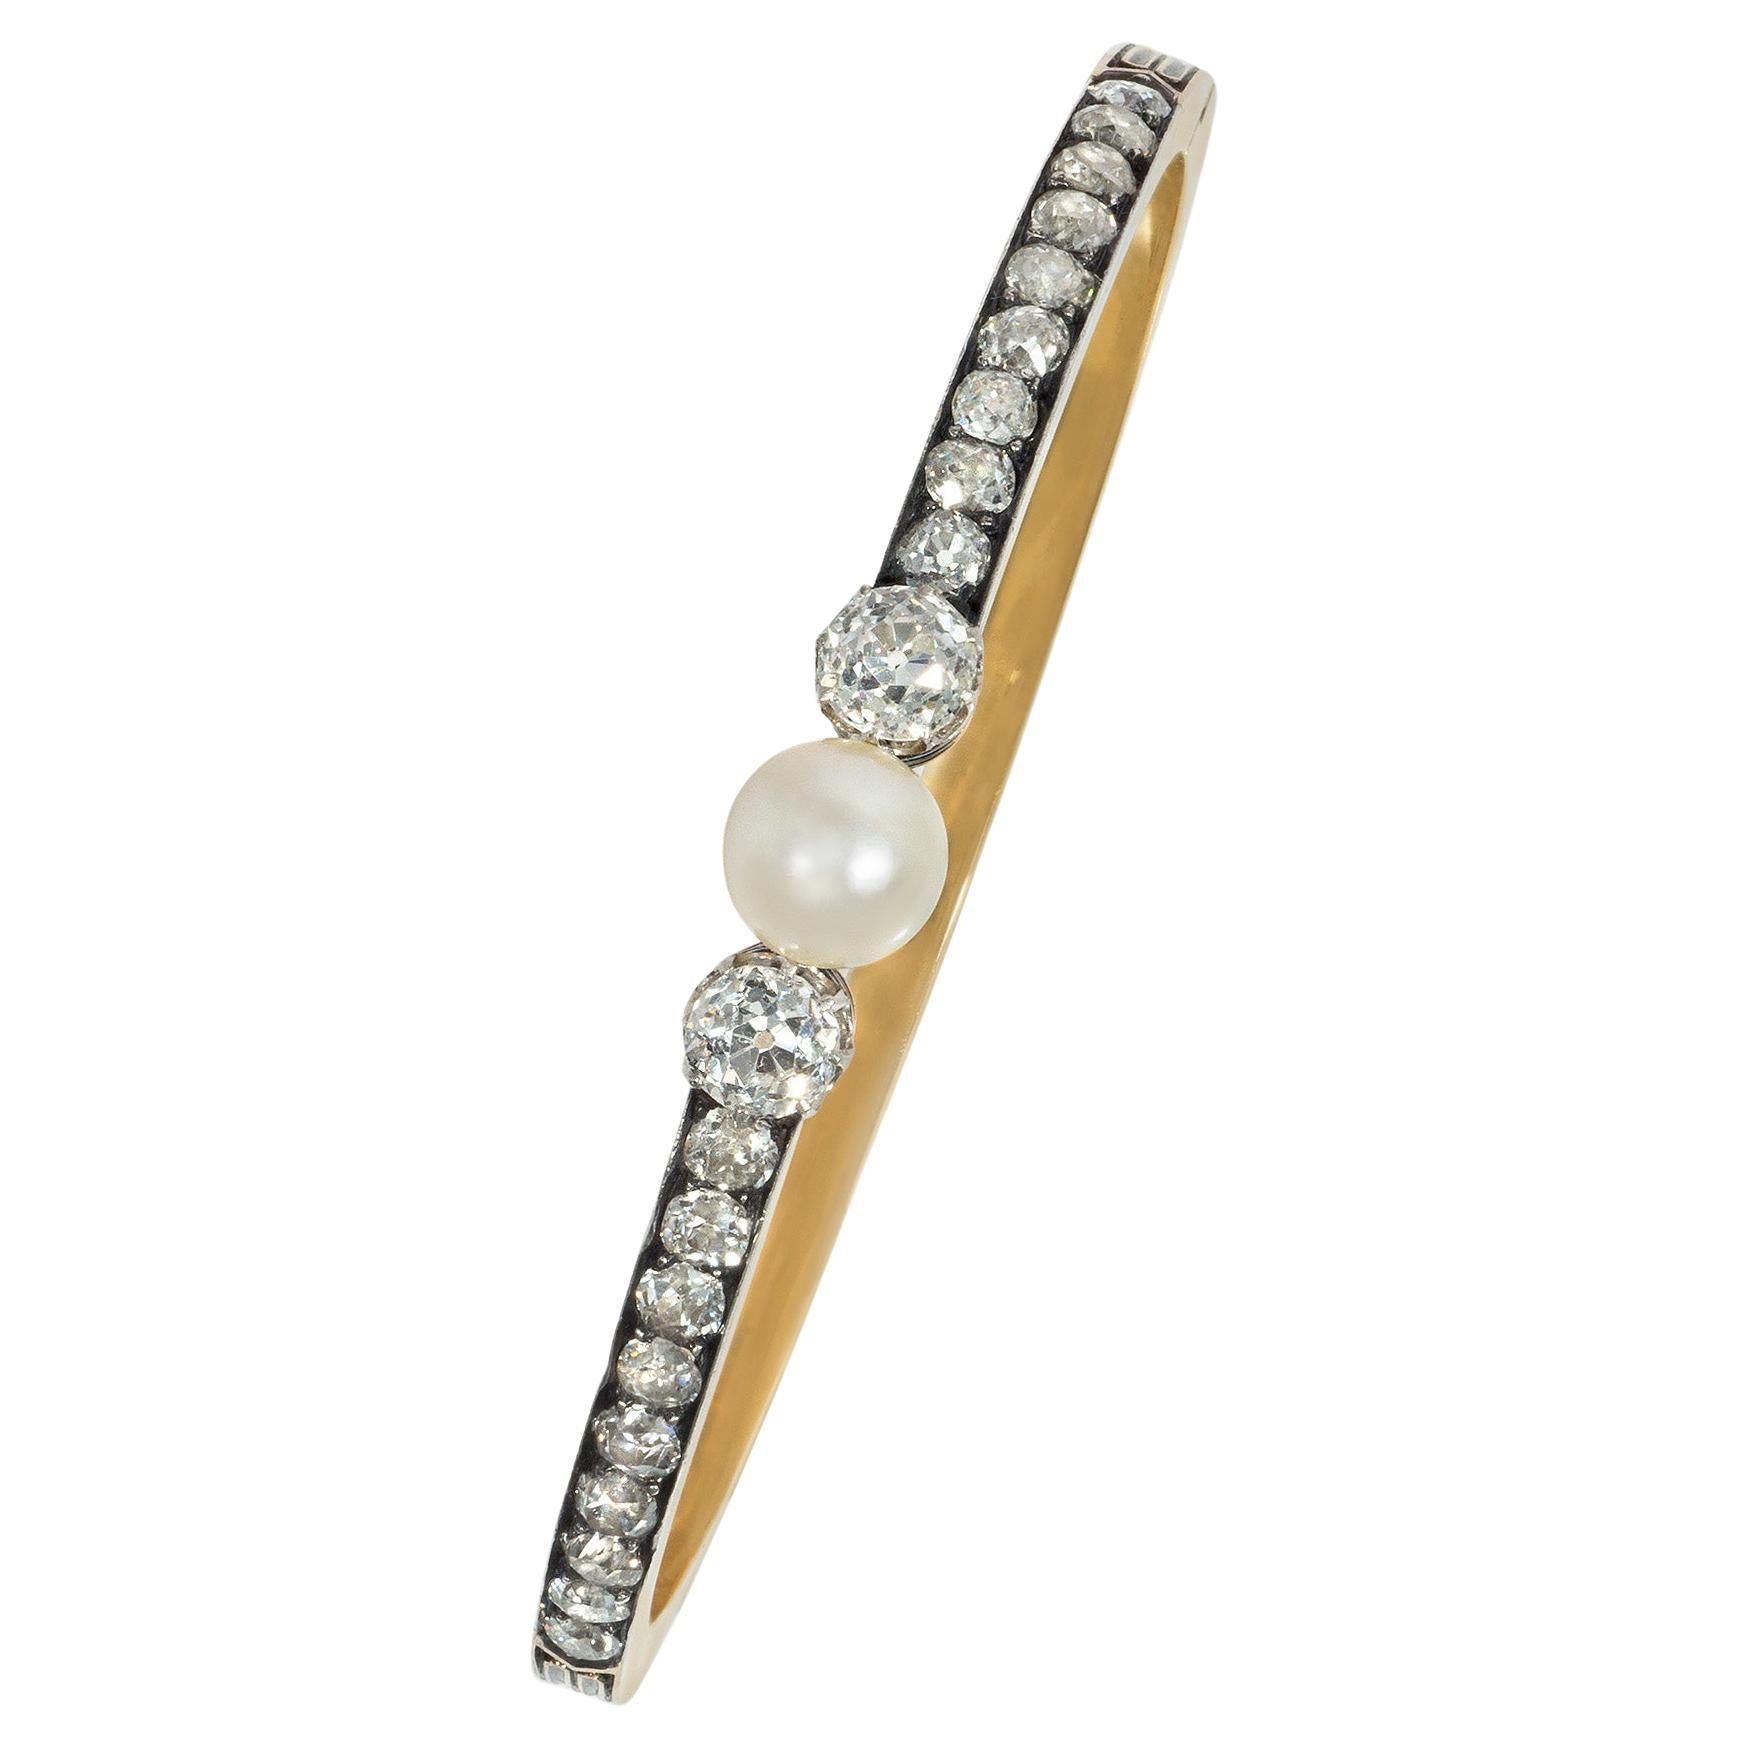 Antique French Old Cut Diamond and Pearl Bangle Bracelet in Silver-Topped Gold For Sale